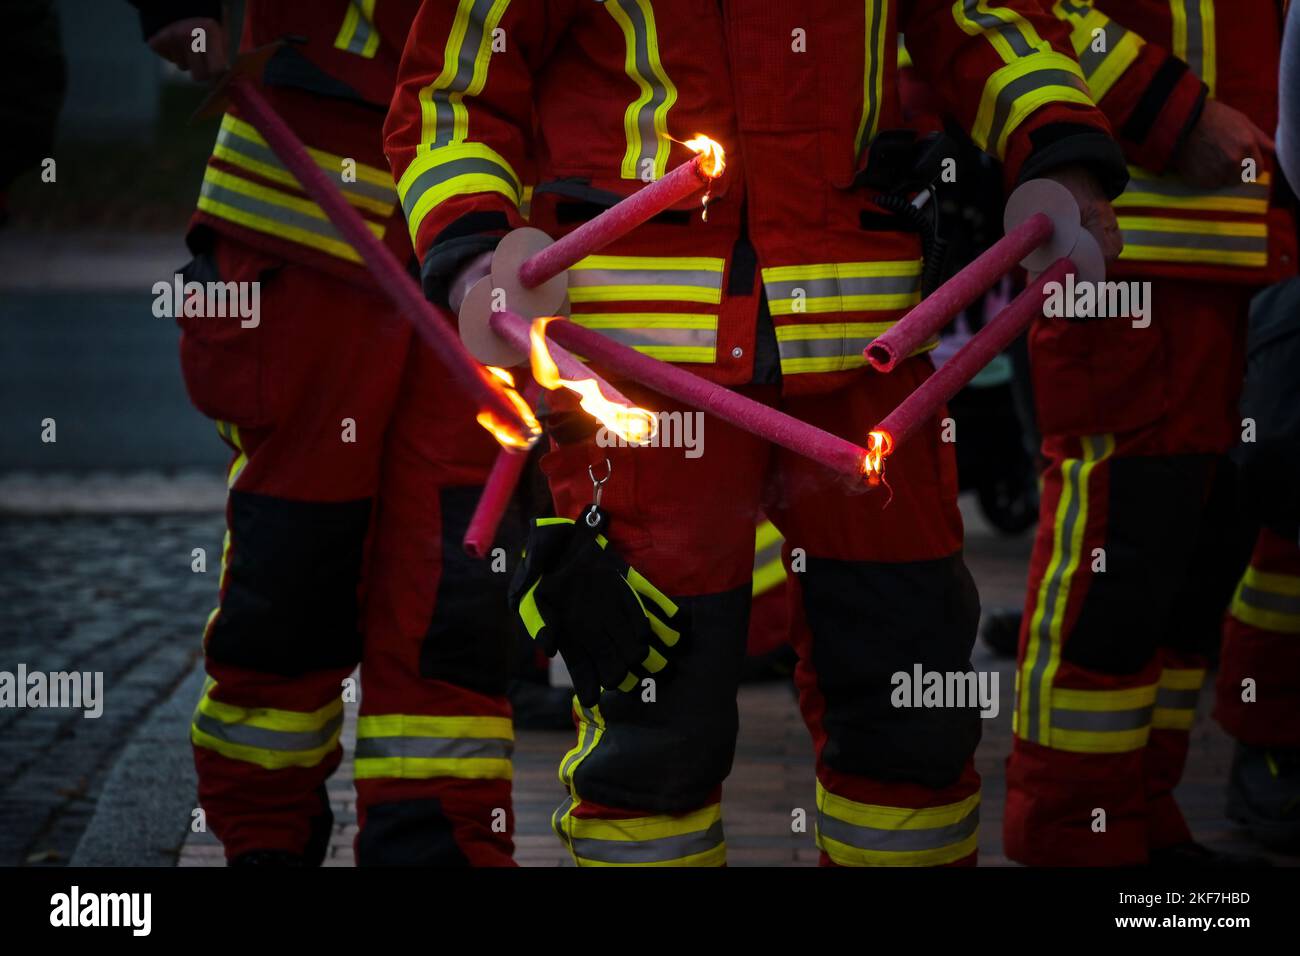 Firefighters lighting torches for a traditional procession of lights on St. Martin's Day at night, selected focus, narrow depth of field Stock Photo